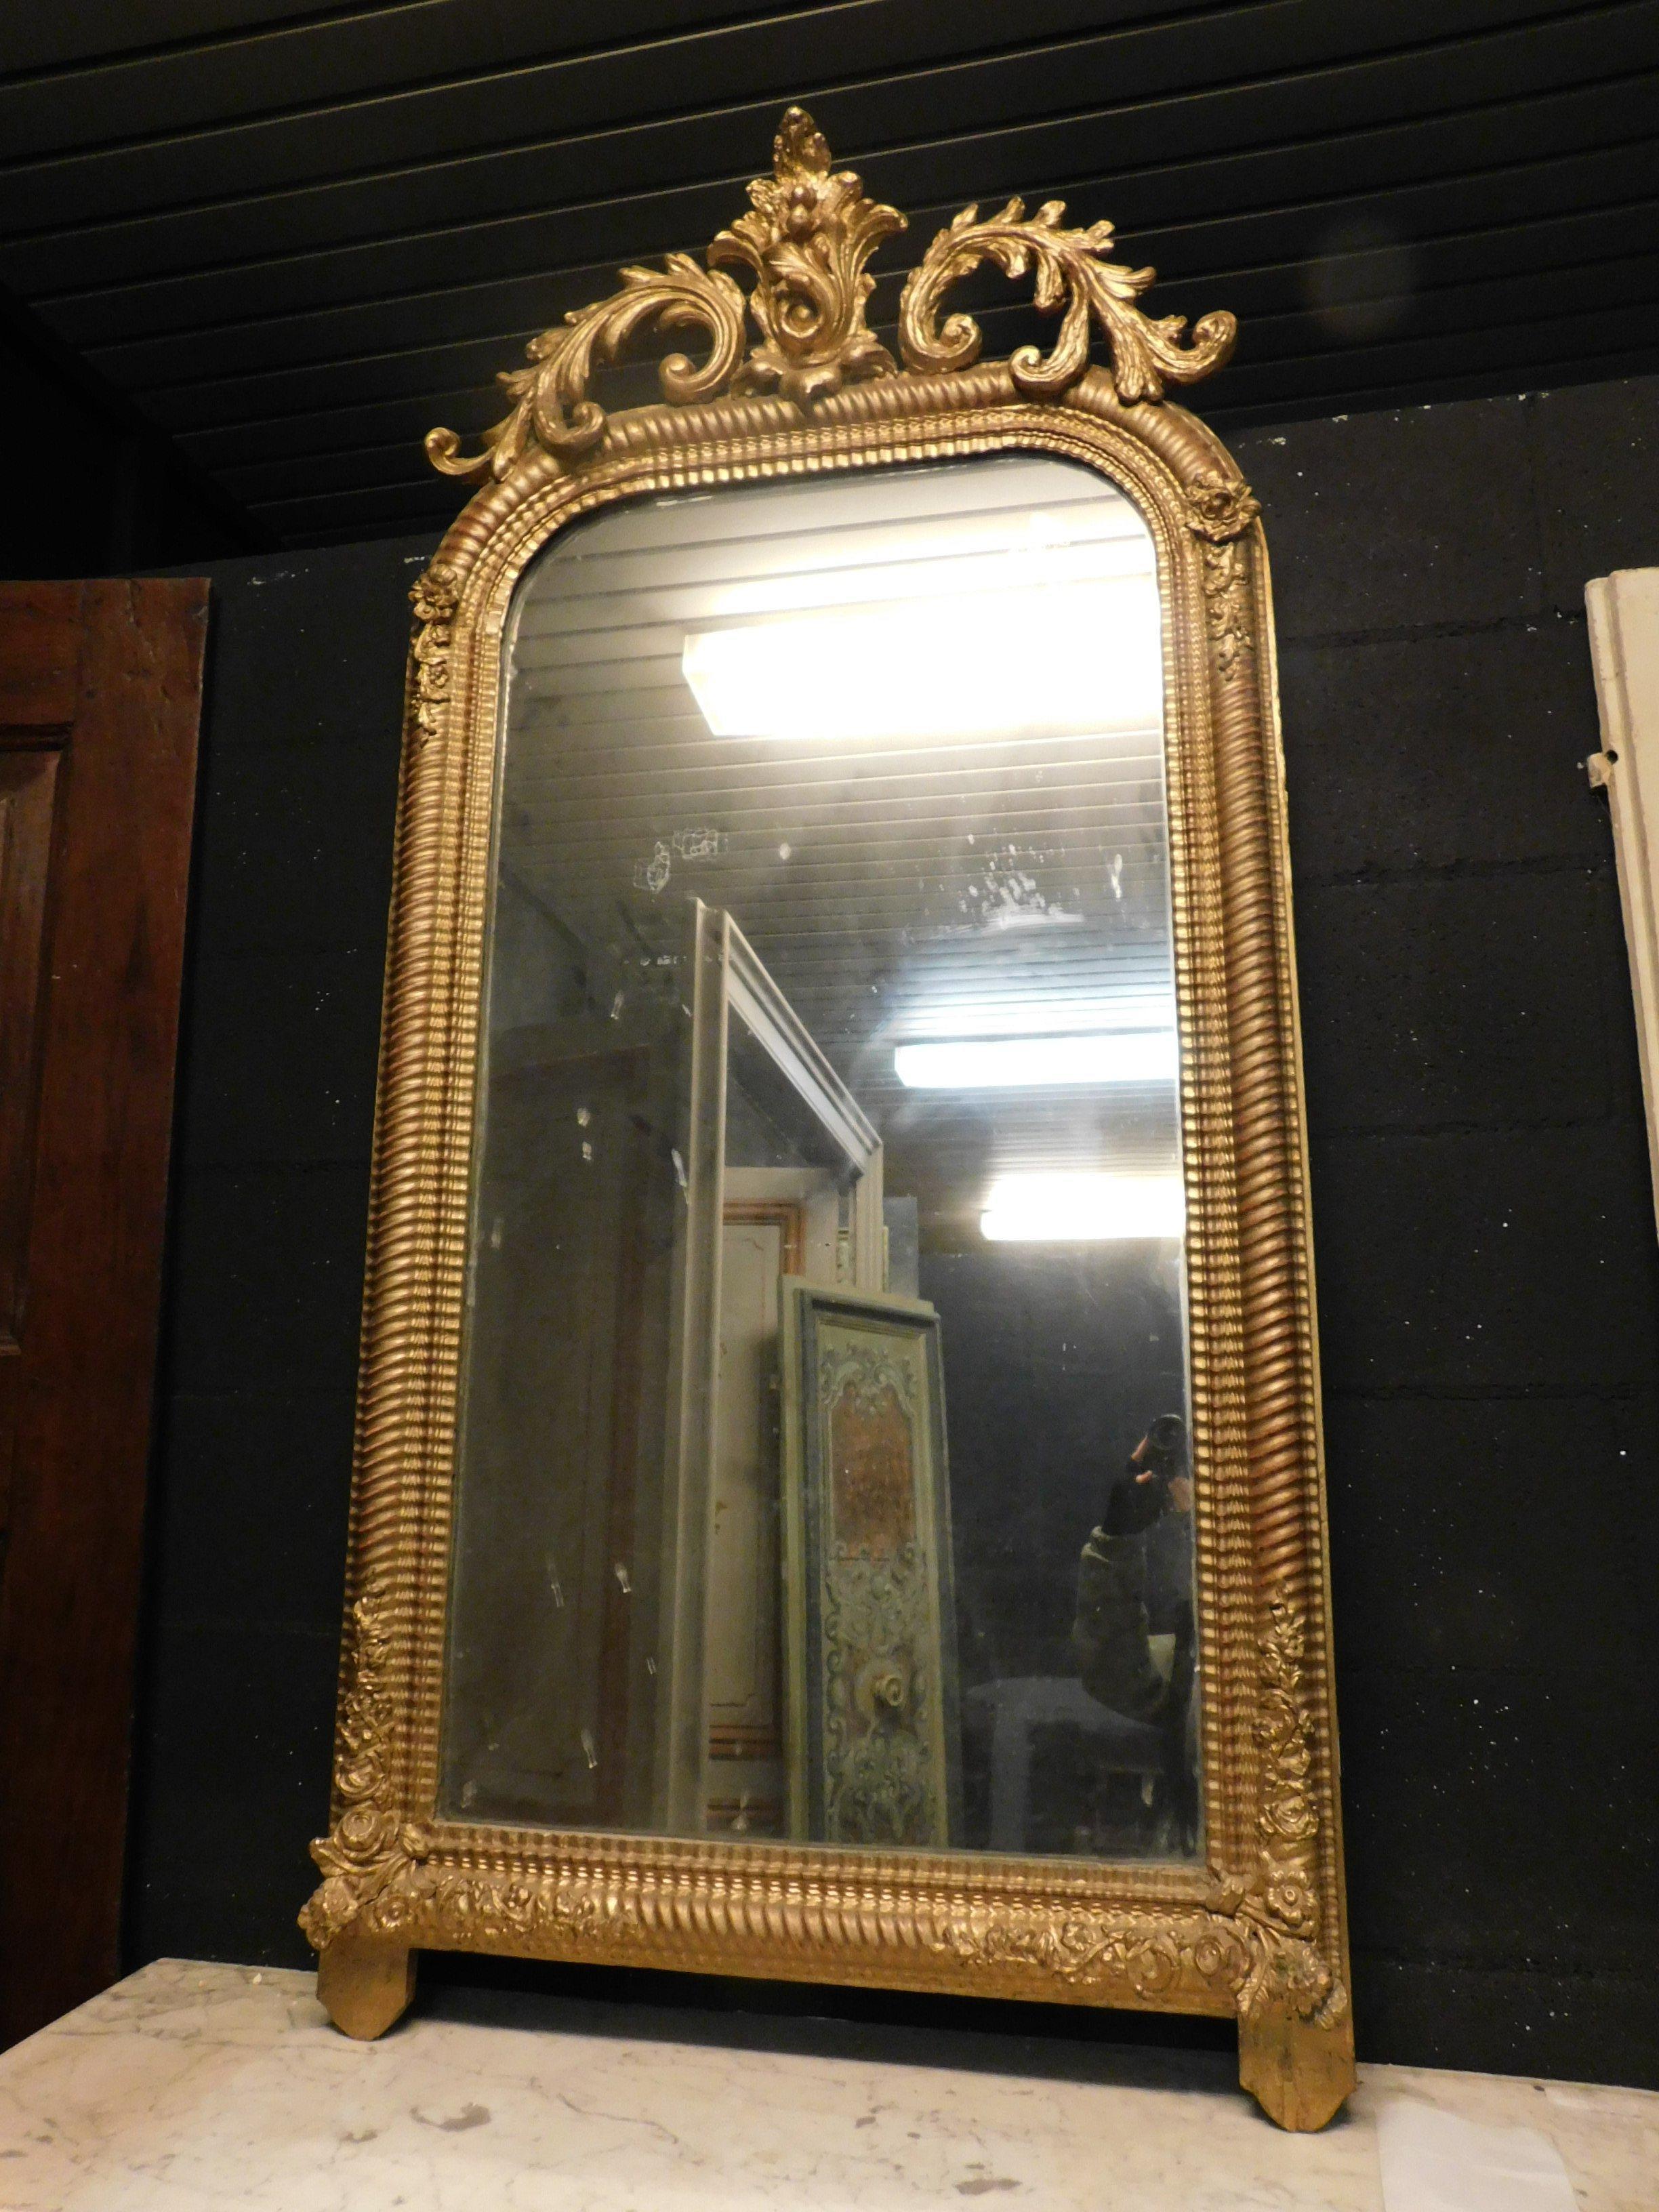 Antique mirror in gilded wood with carved rib, floral motifs in the upper part and carved frame, very rich and beautiful also maintaining a linear geometric shape that can be adapted to all uses and interiors, built entirely by hand in the 19th